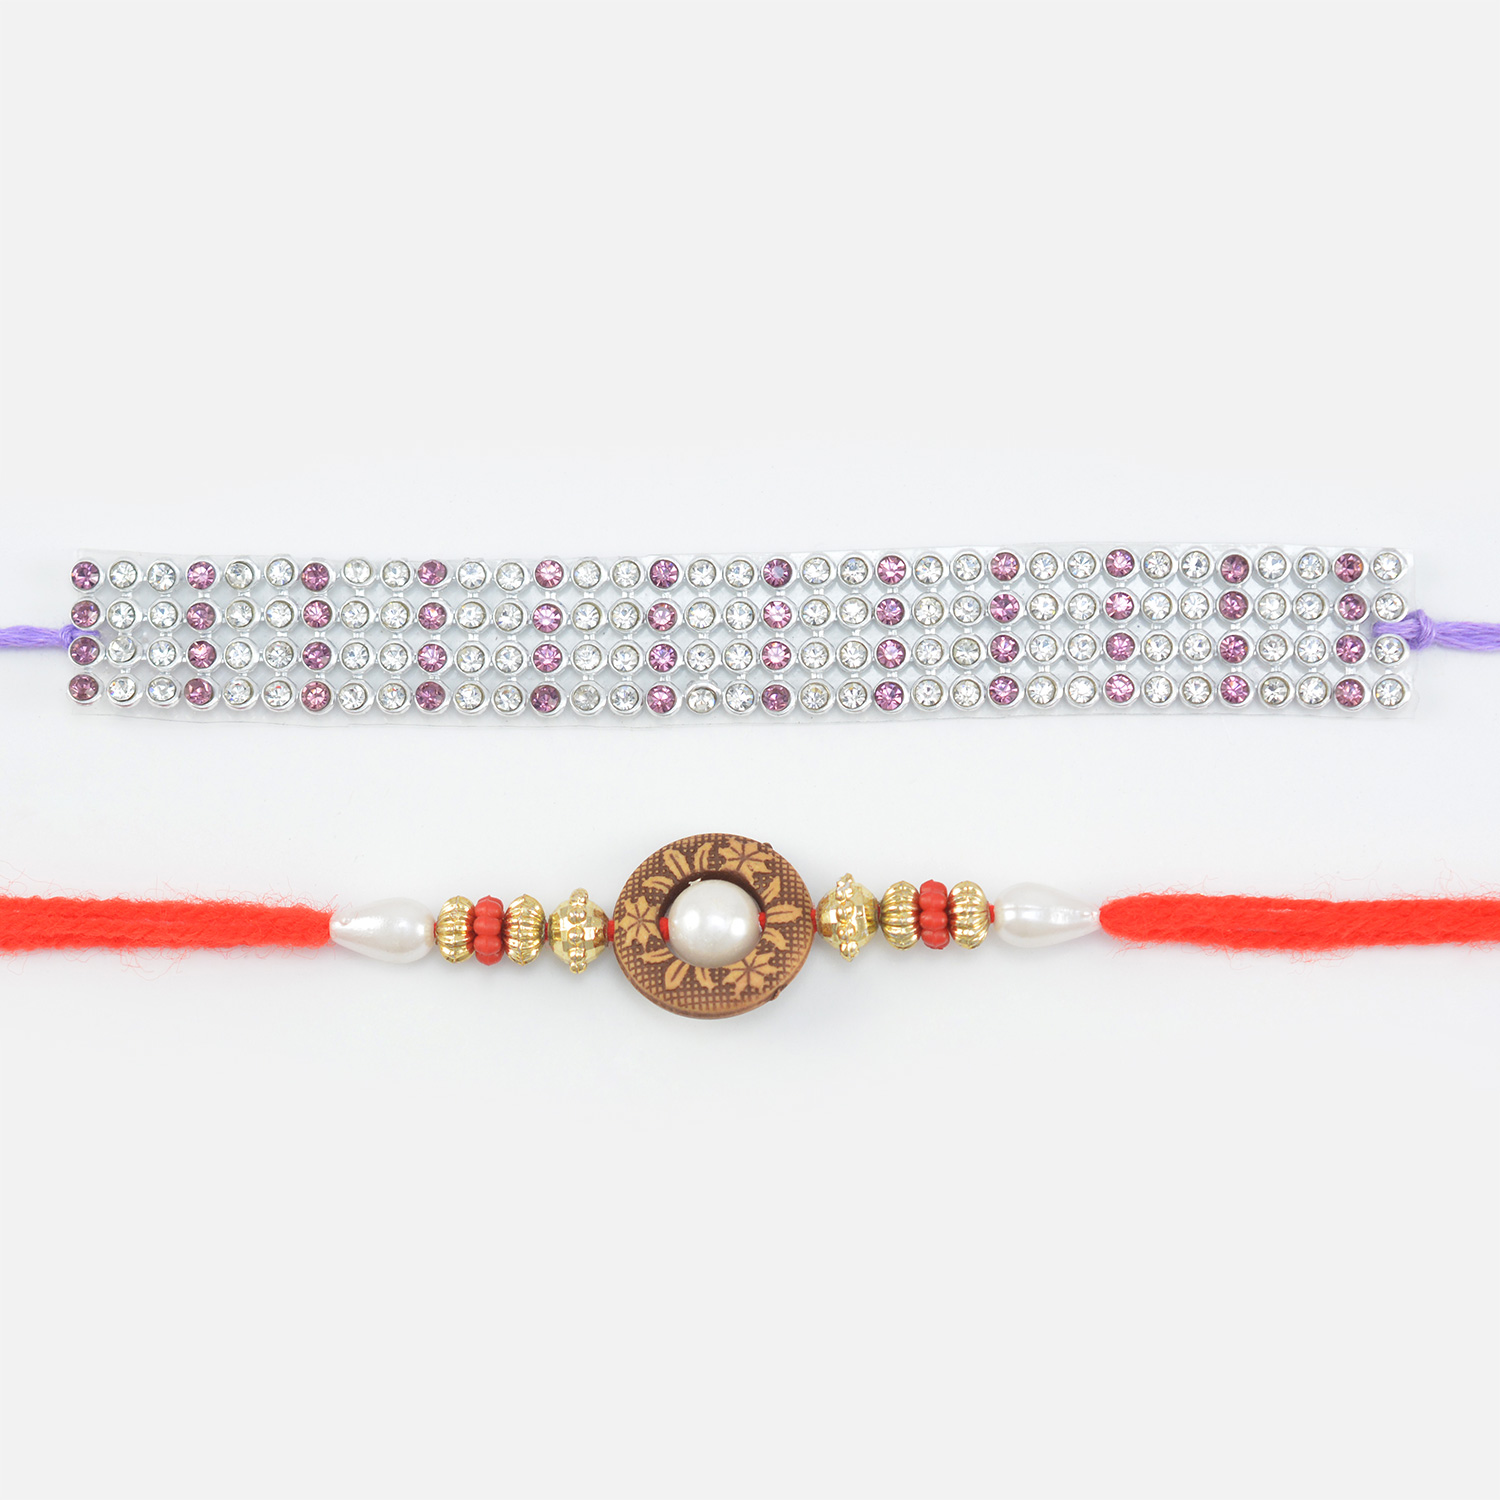 Bracelet Type New Stylish Looking Jewel Dotted and Big Bead in Mauli Thread Rakhi for Brother